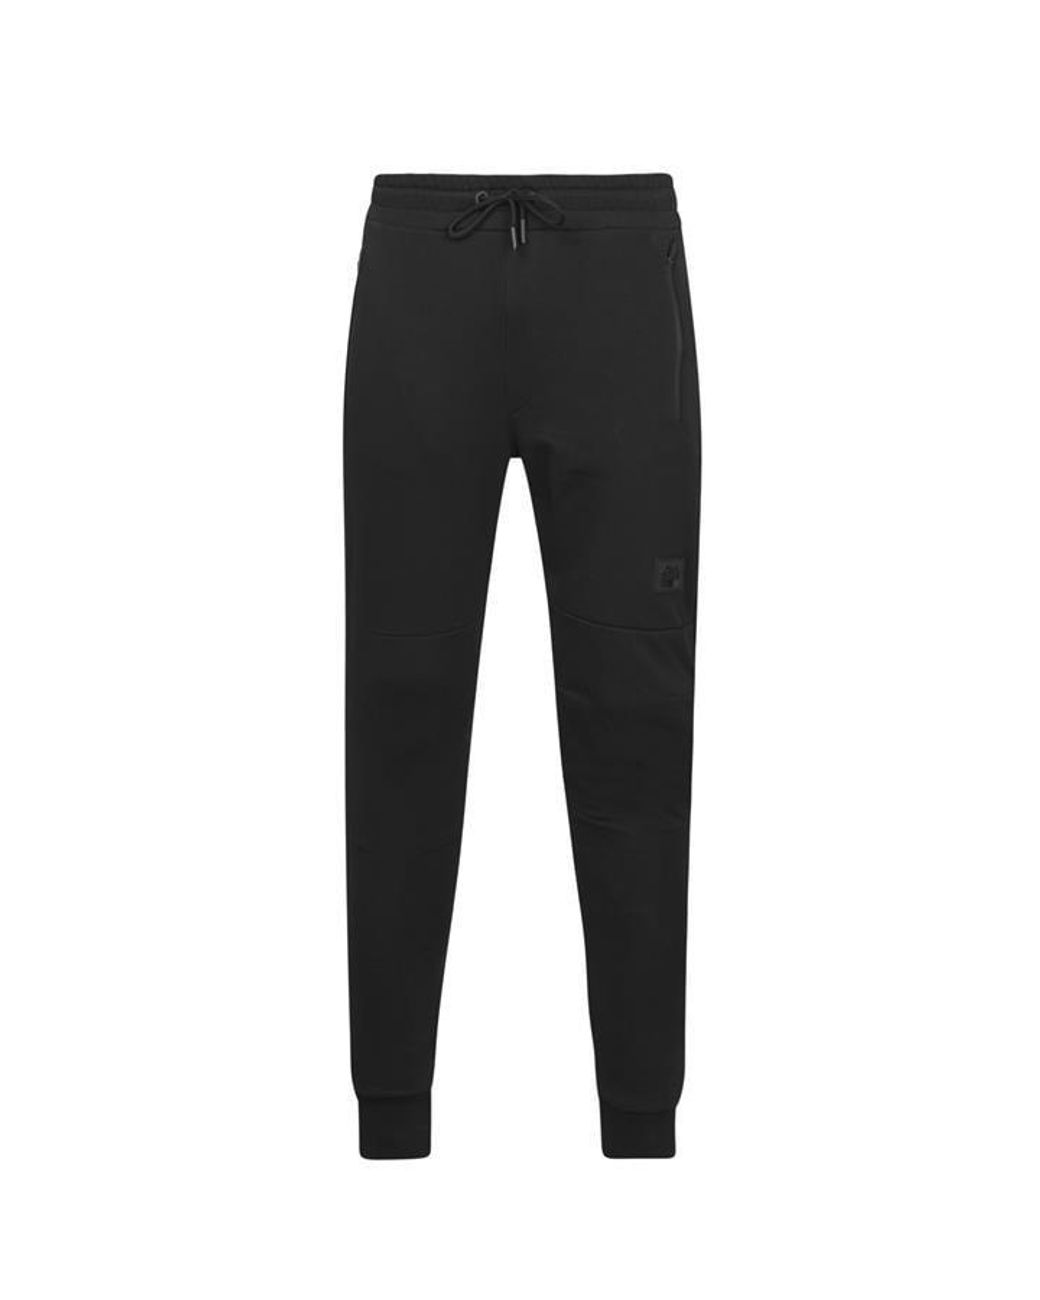 ANT MIDDLETON X TWINZZ Lifestyle jogger in Black for Men | Lyst UK